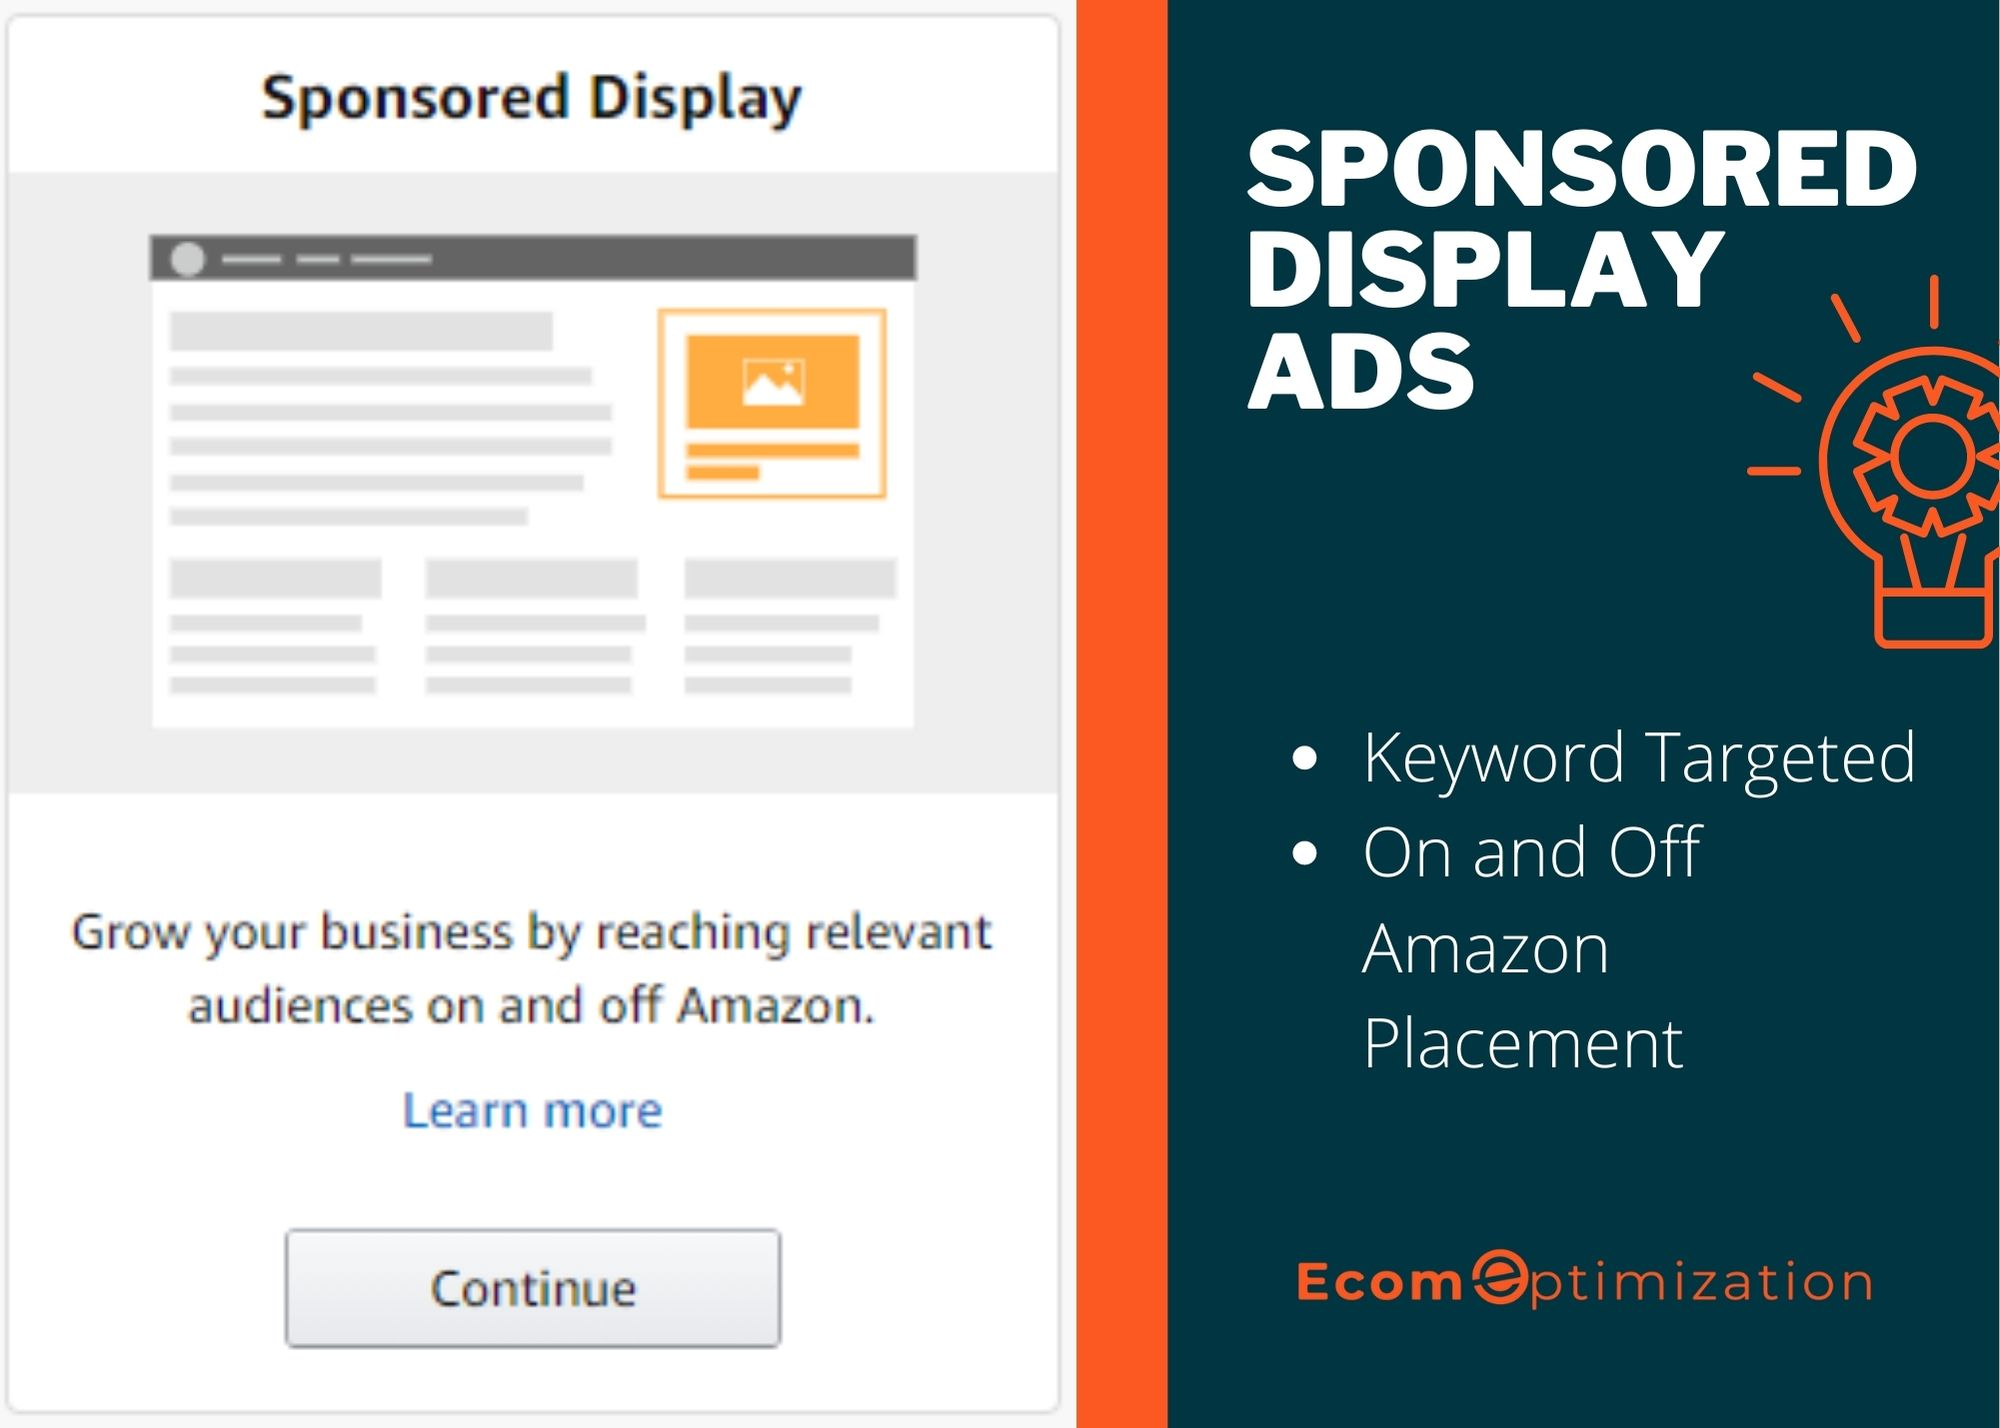 Sponsored Display Ads give you options for placement on and off of Amazon